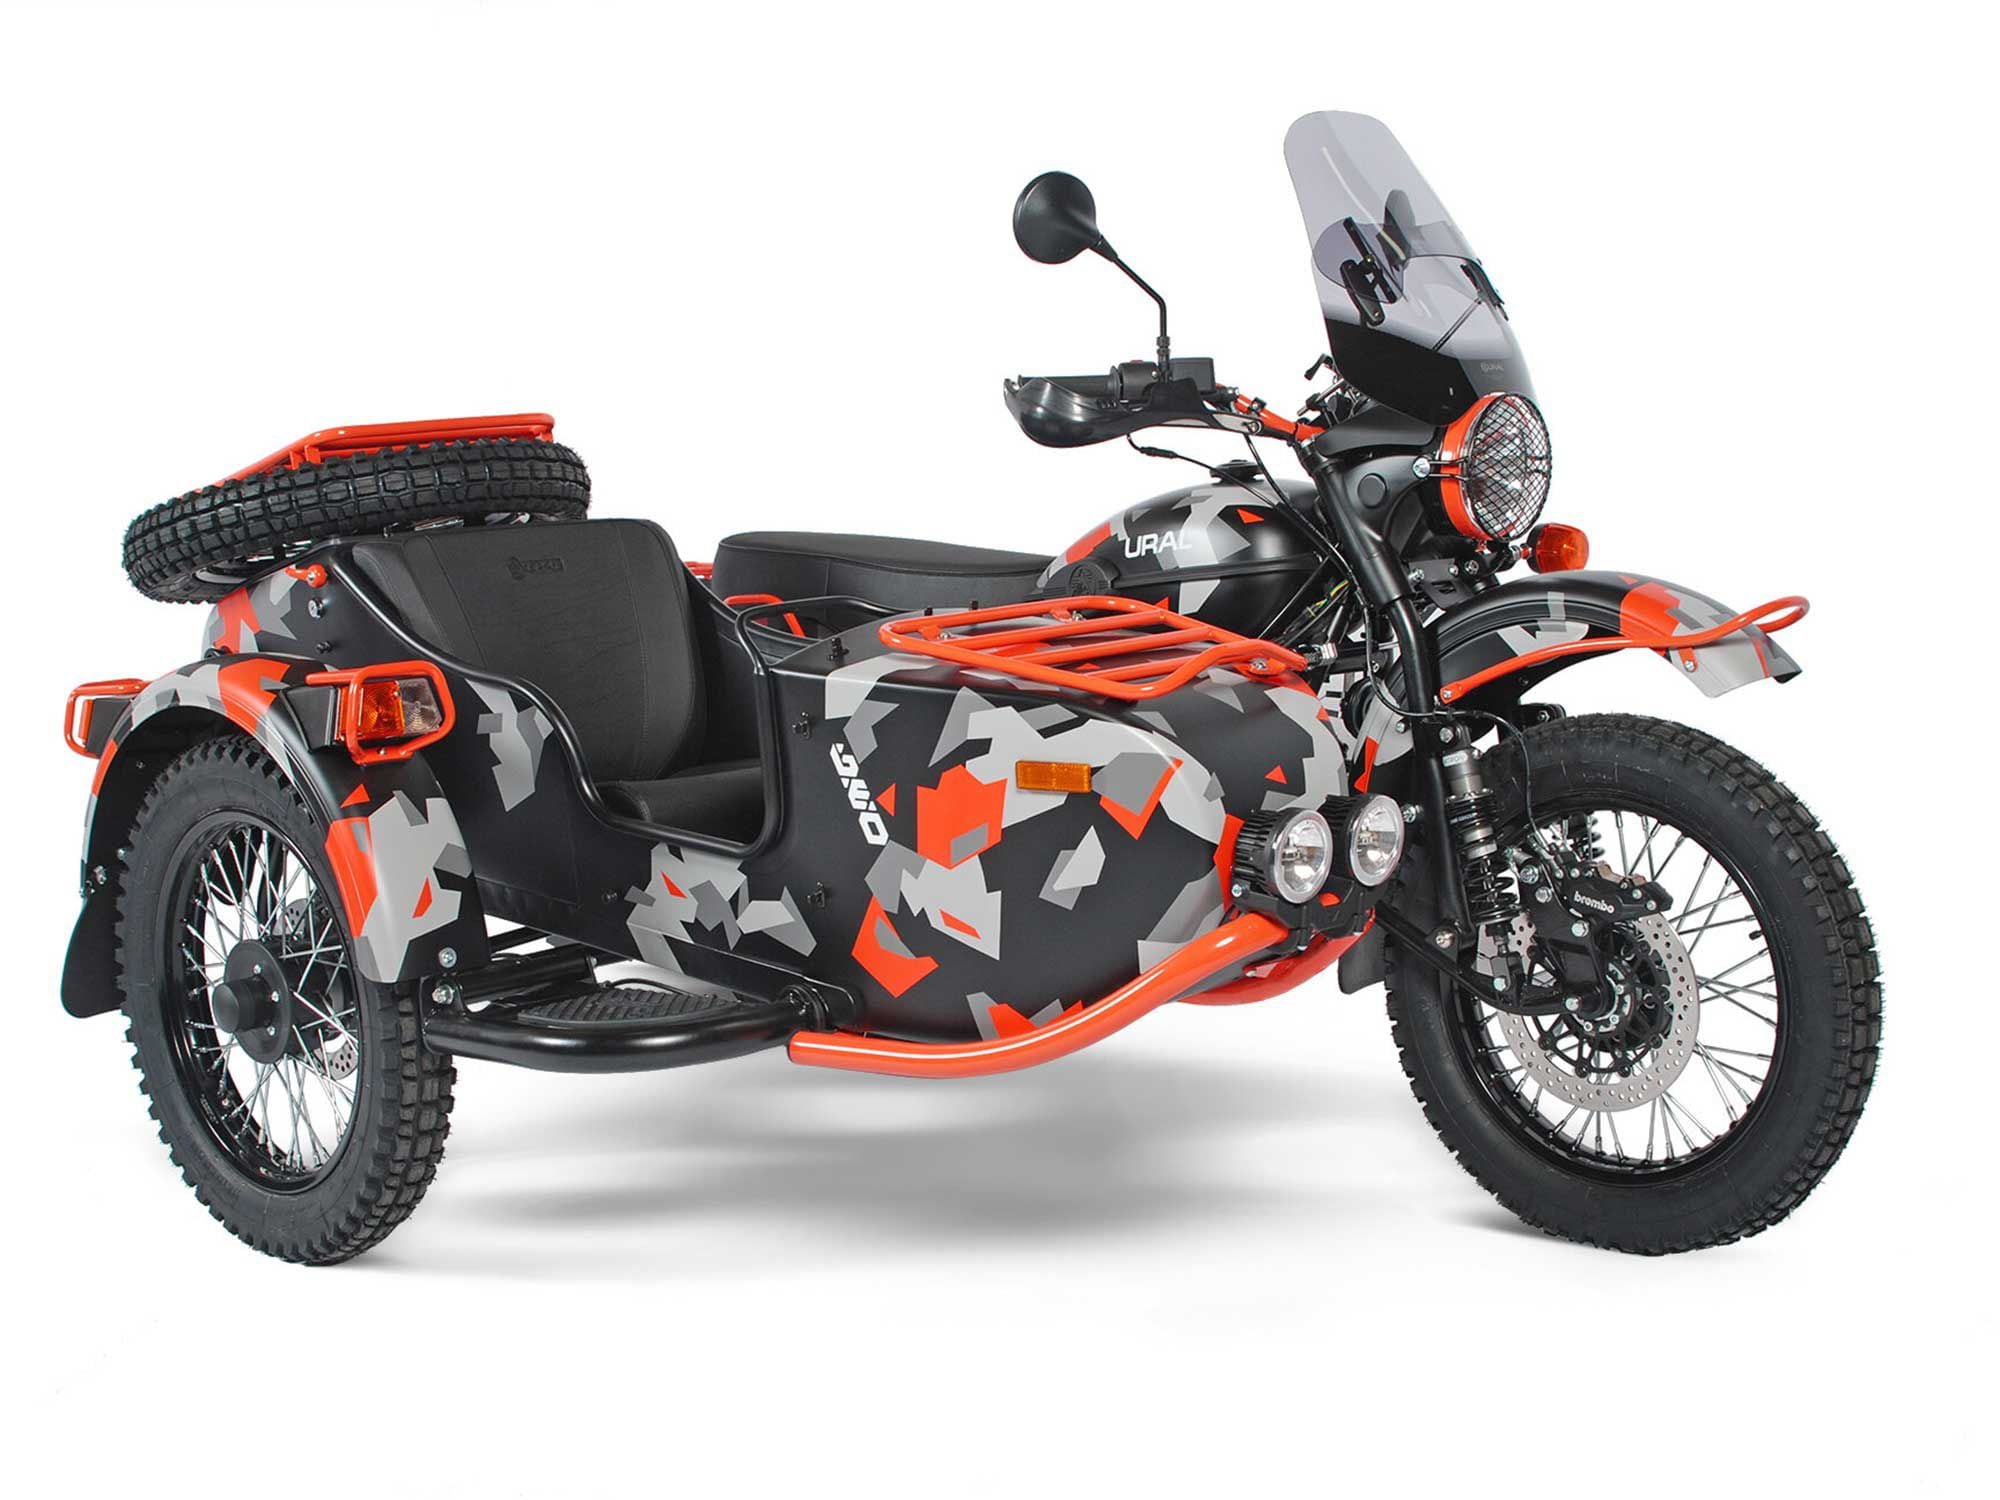 Why 20? The Ural press release says, “Svetlana from the paint department said… ‘No more!’” I’m not sure if that’s a joke or not. |